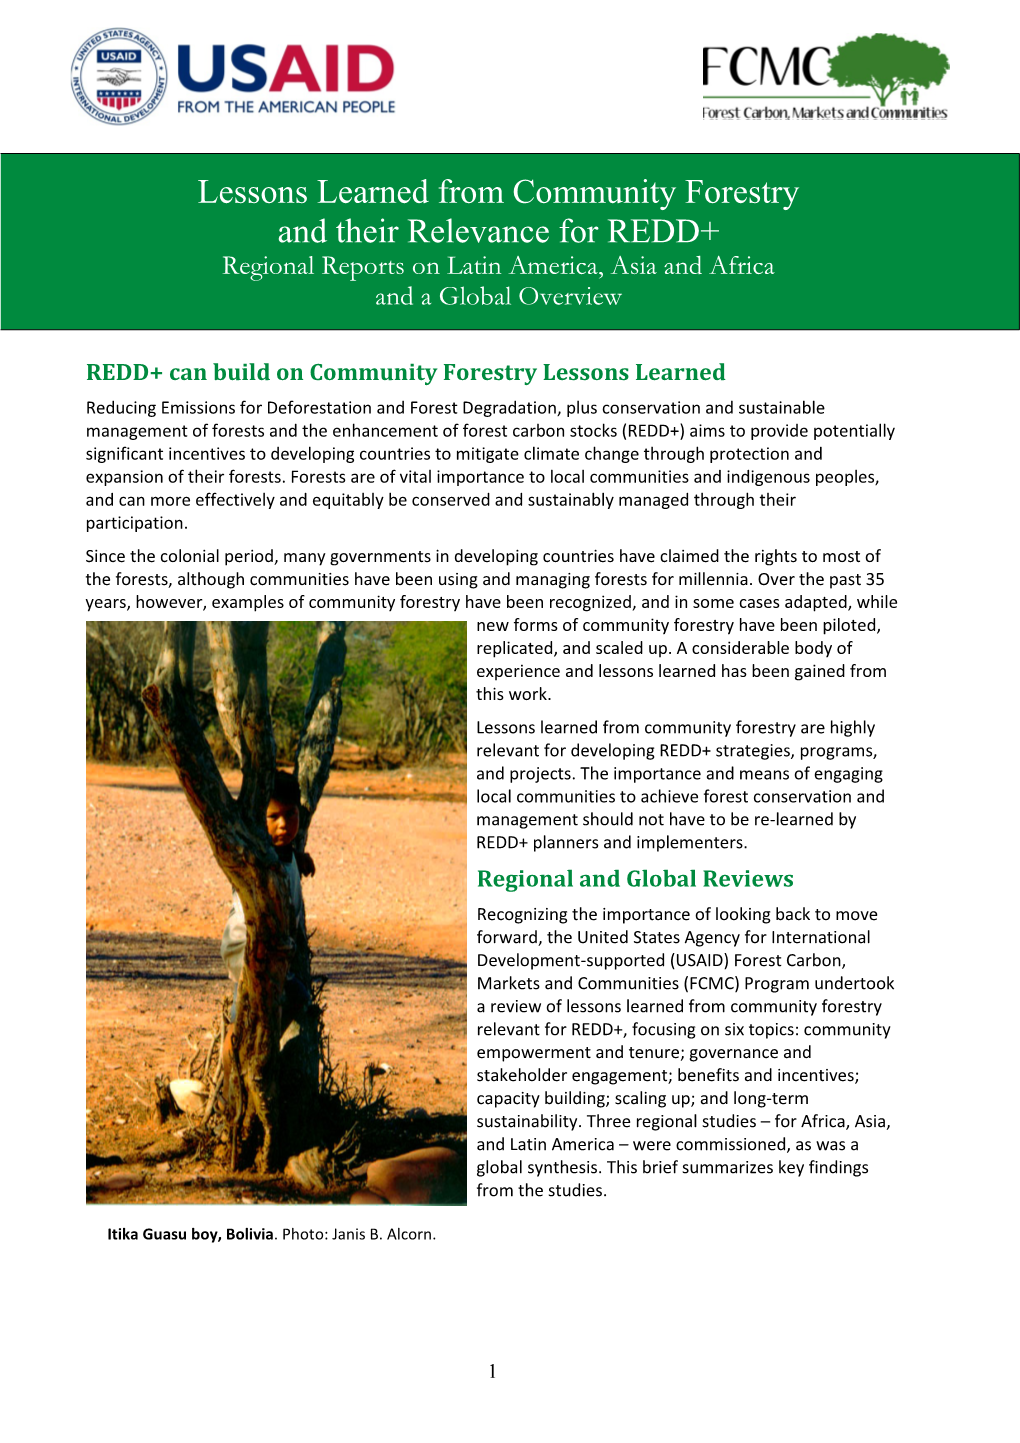 Lessons Learned from Community Forestry and Their Relevance for REDD+